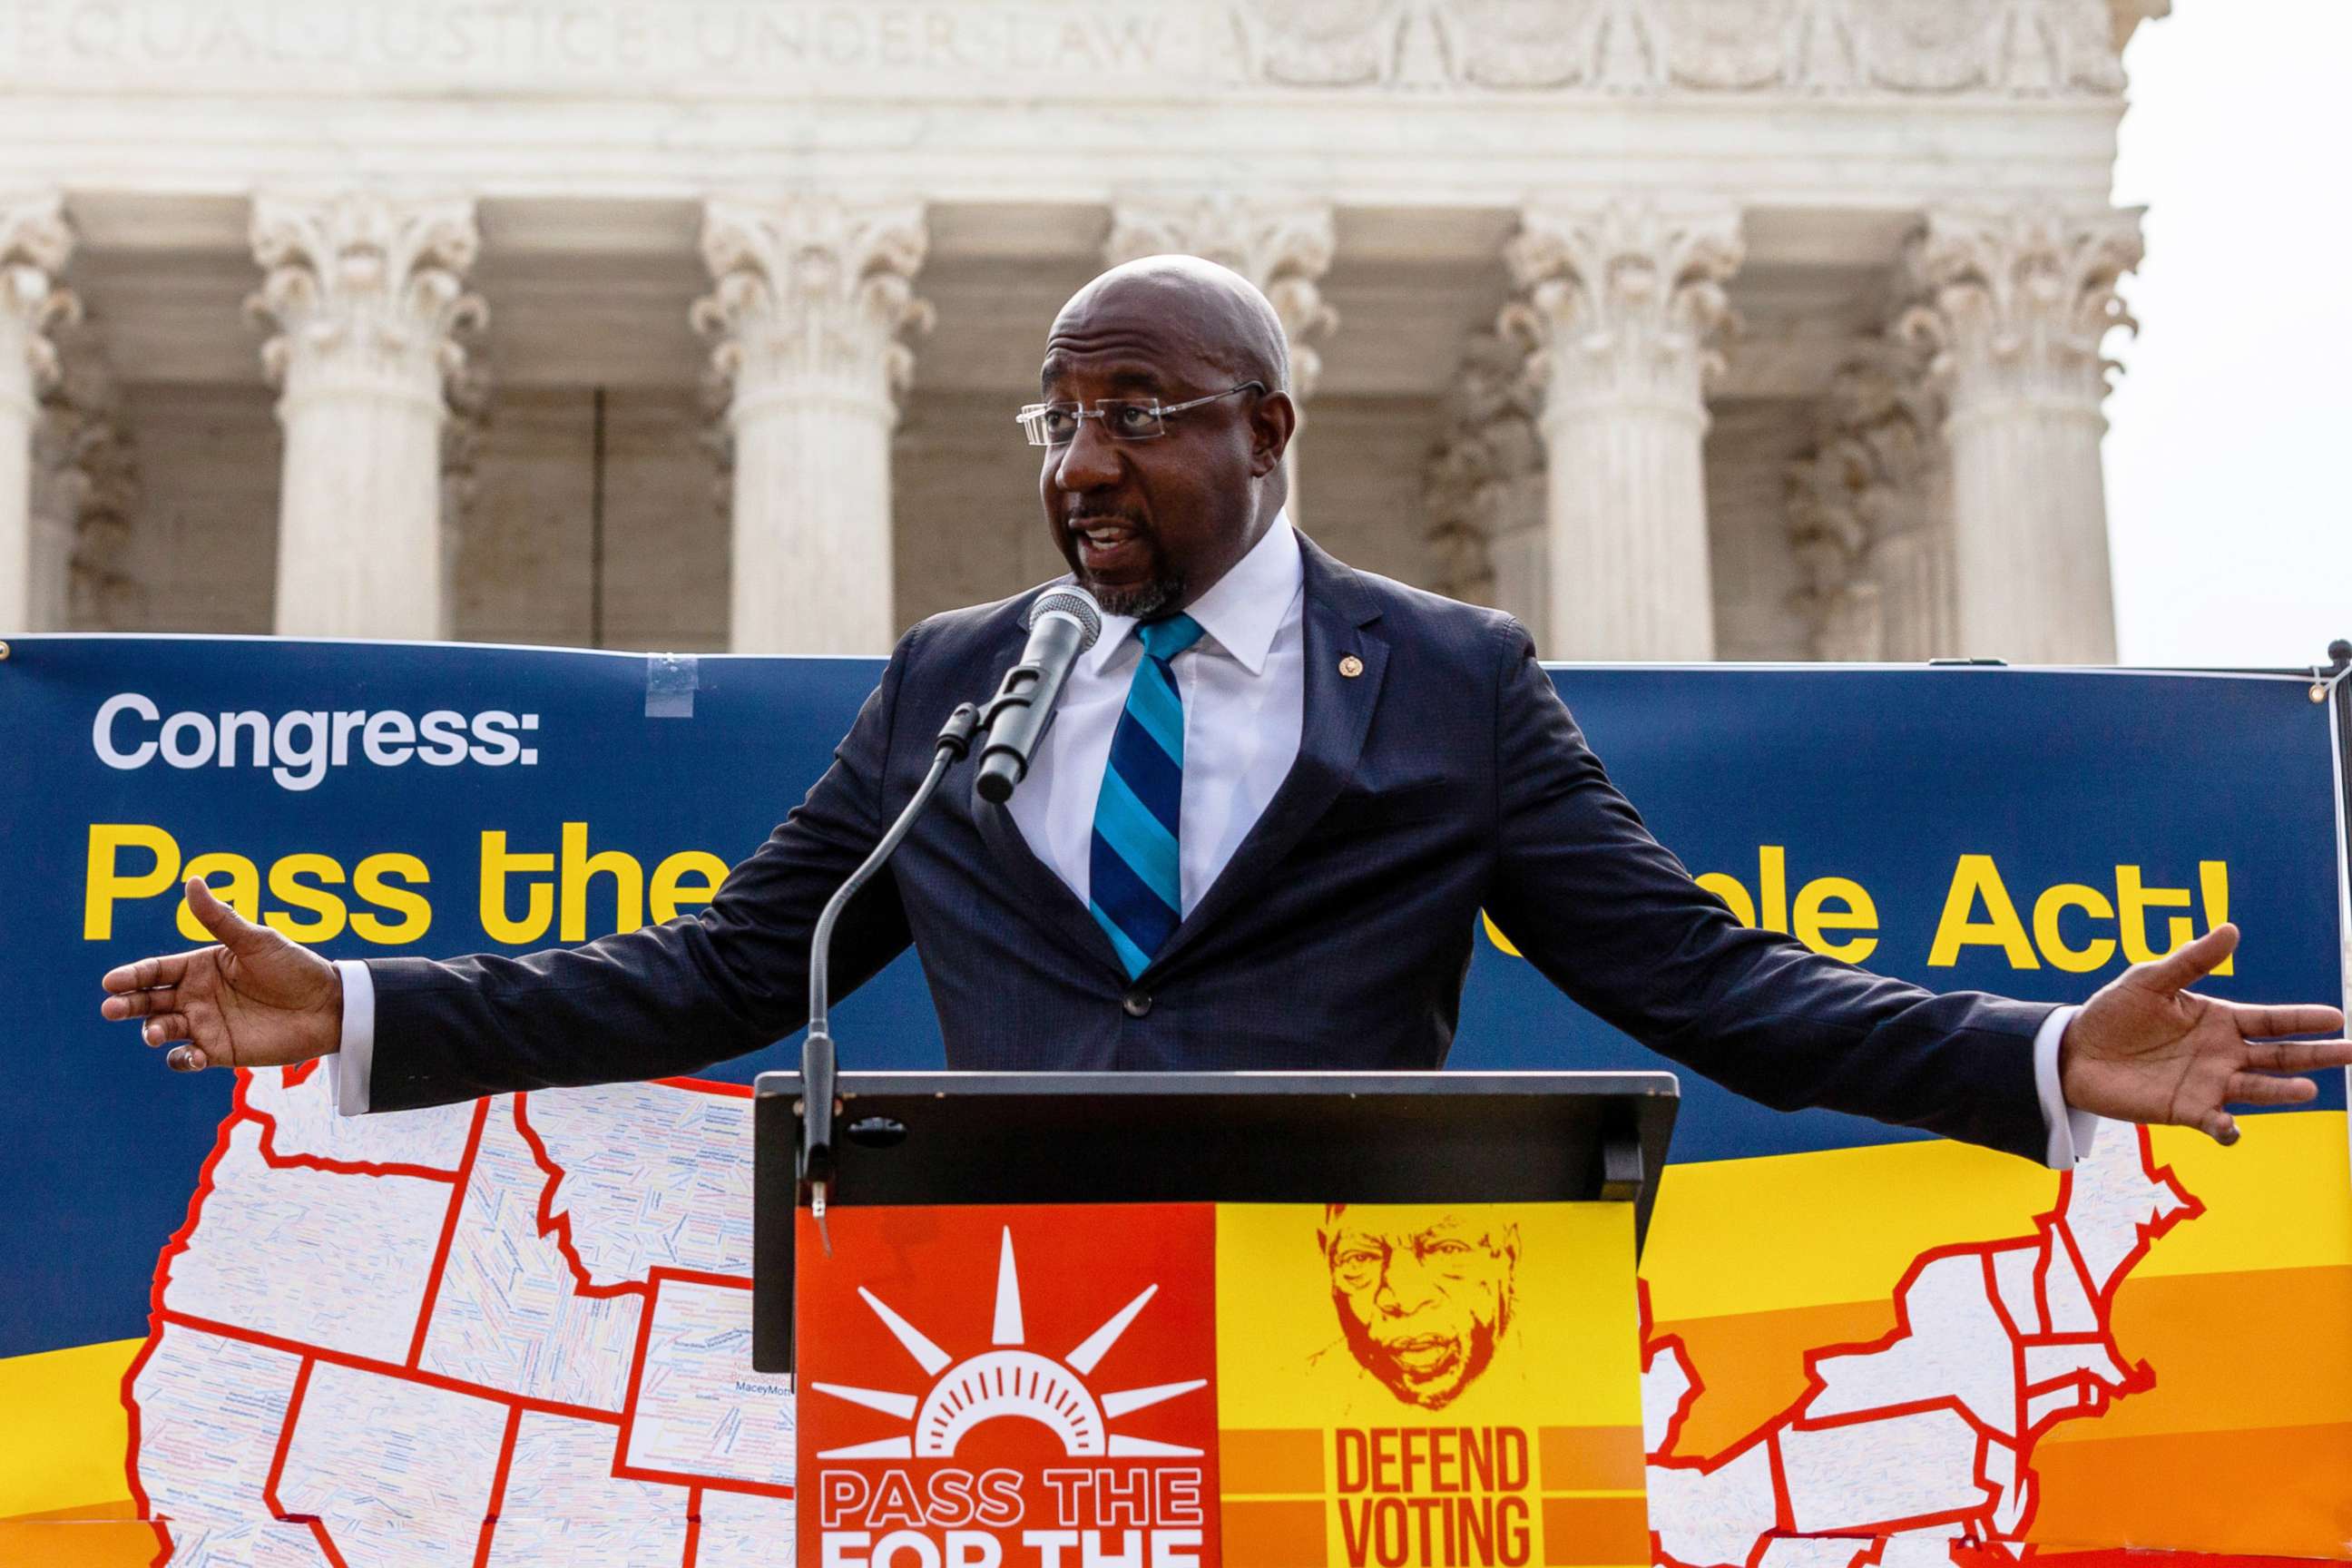 PHOTO: Senator Raphael Warnock of Georgia speaks at a rally to pass the For the People Act at the Supreme Court, June 9, 2021, in Washington, D.C.